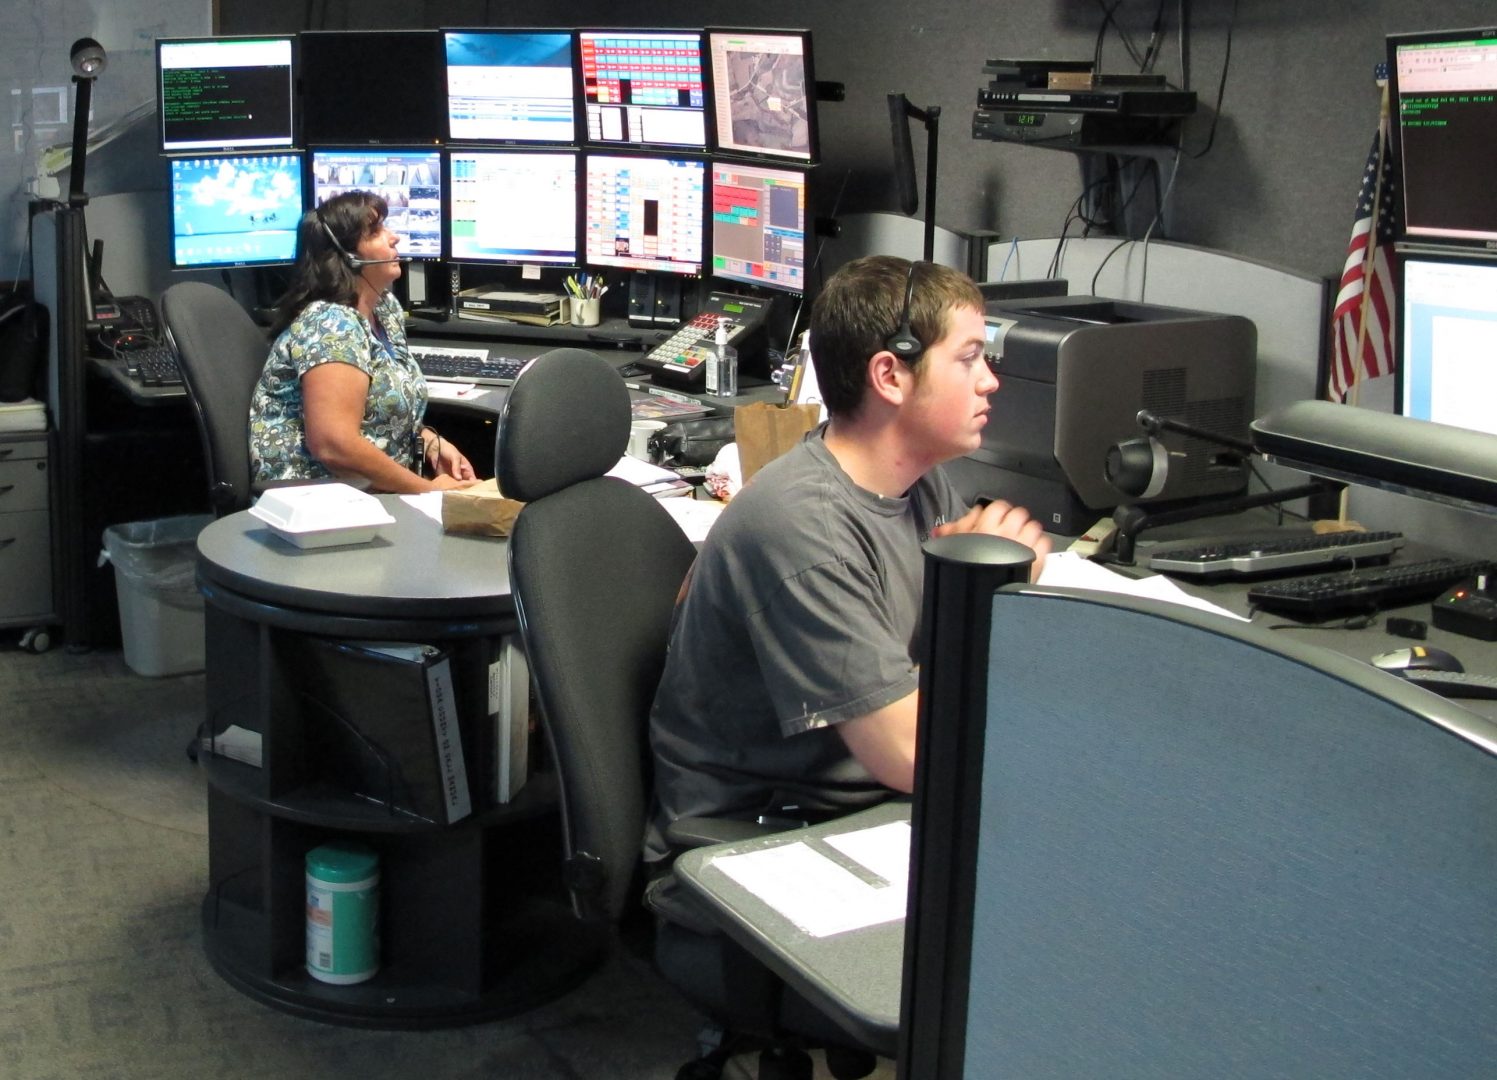 Sheila Delosa and another Dispatcher work in Tioga County's 911 center